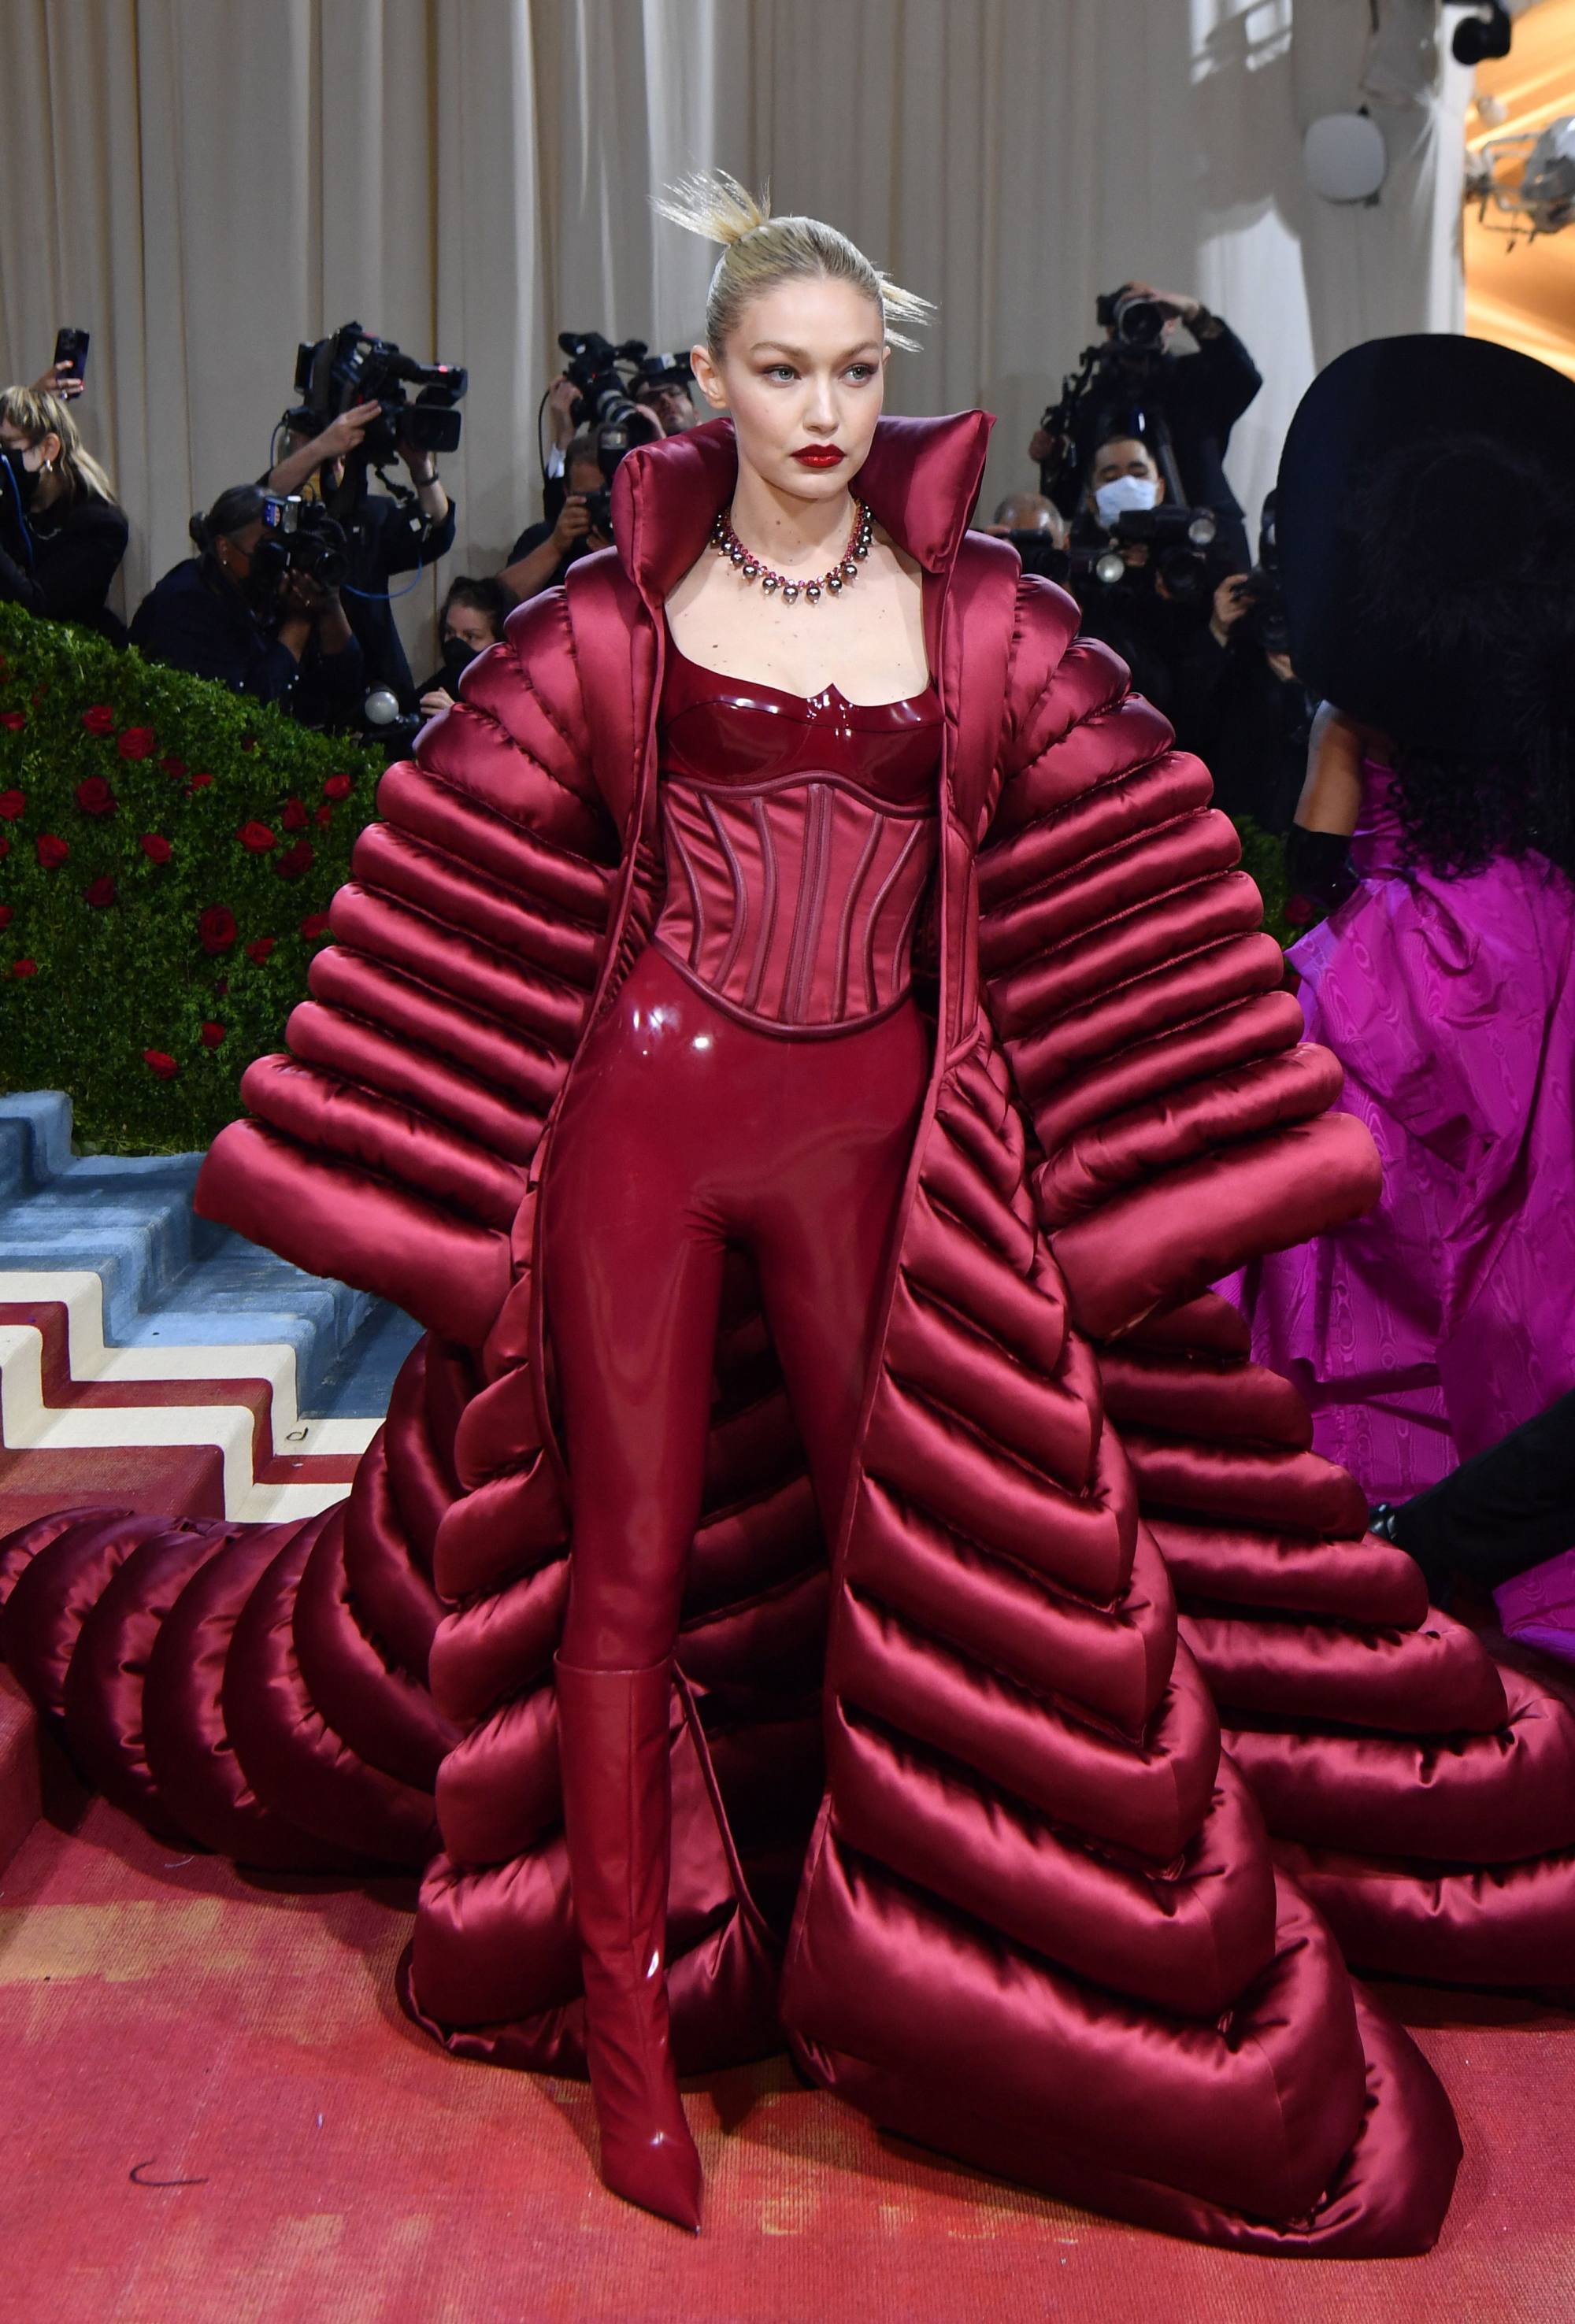 Model Gigi Hadid dons a bold burgundy puffer opera coat as she arrives for the 2022 Met Gala at the Metropolitan Museum of Art. Photo: AFP